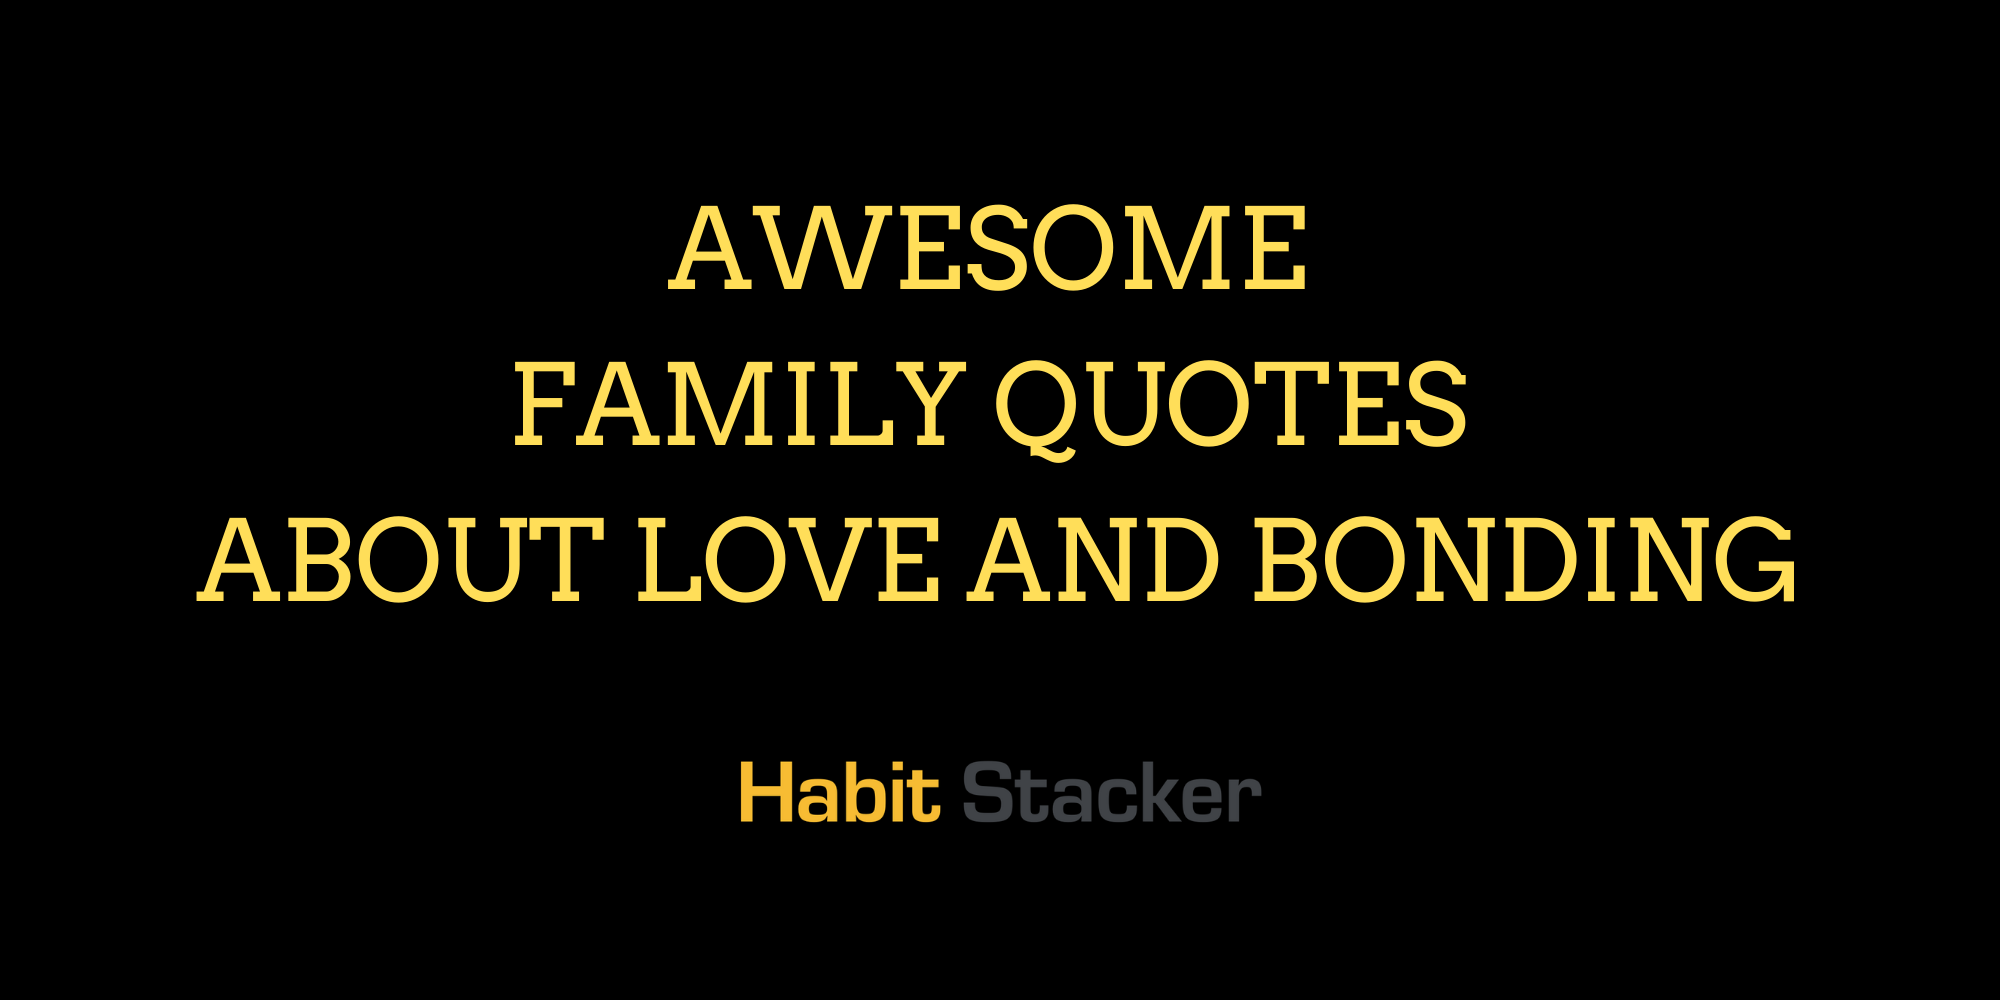 24 Awesome Family Quotes  About Love and Bonding Habit 